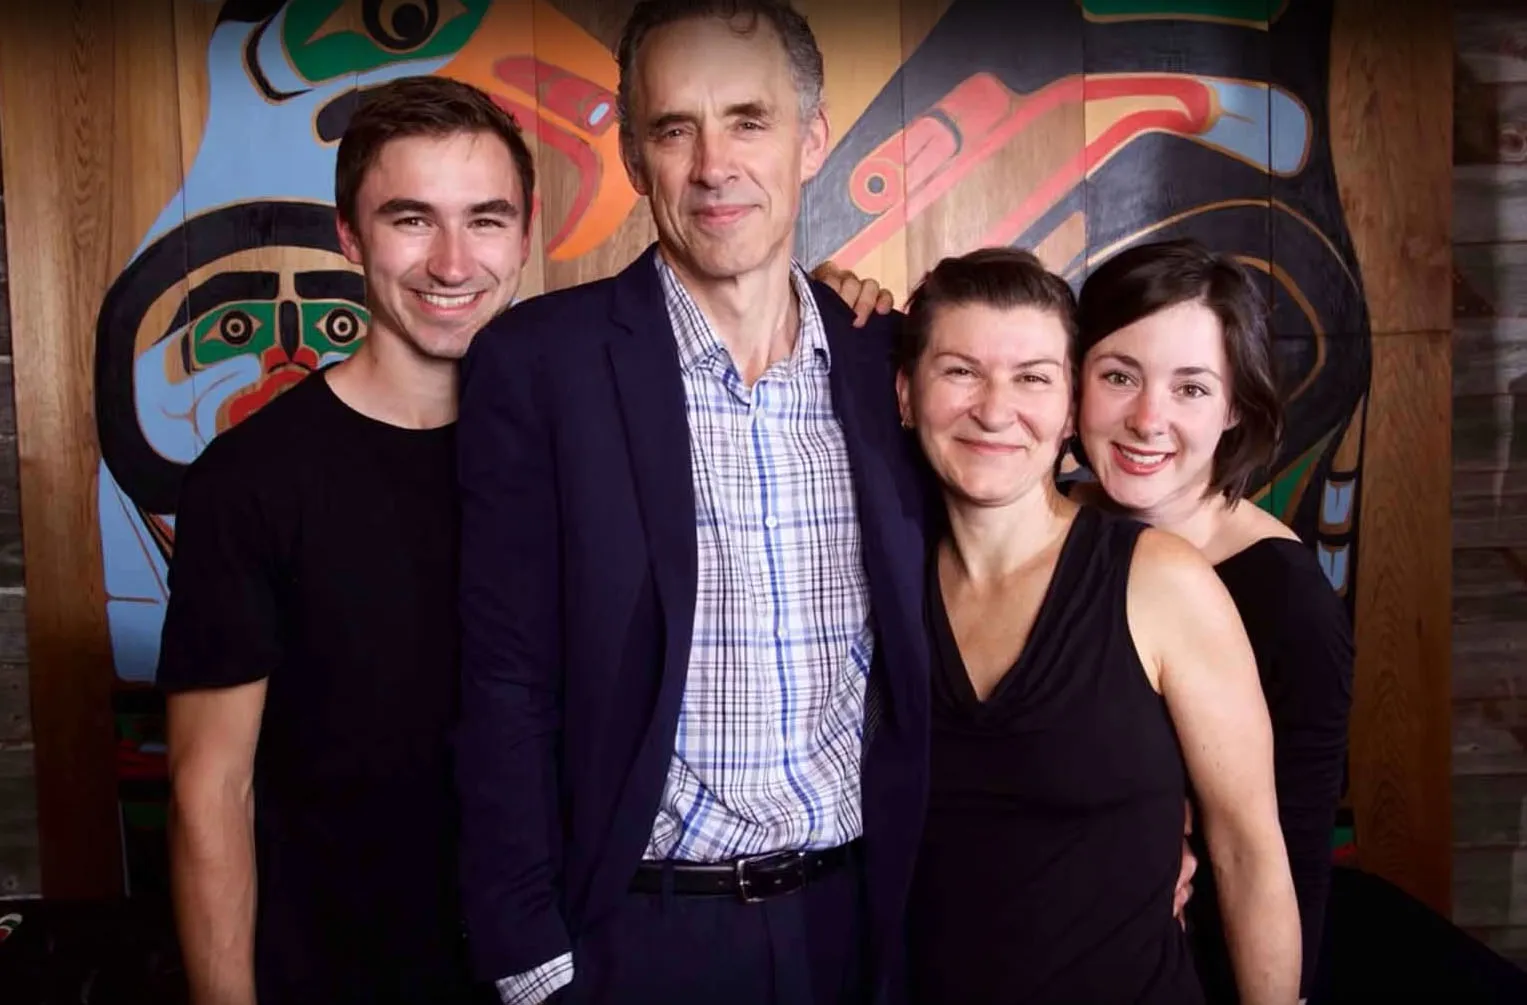 Jordan peterson posing for a picture with his wife and children.